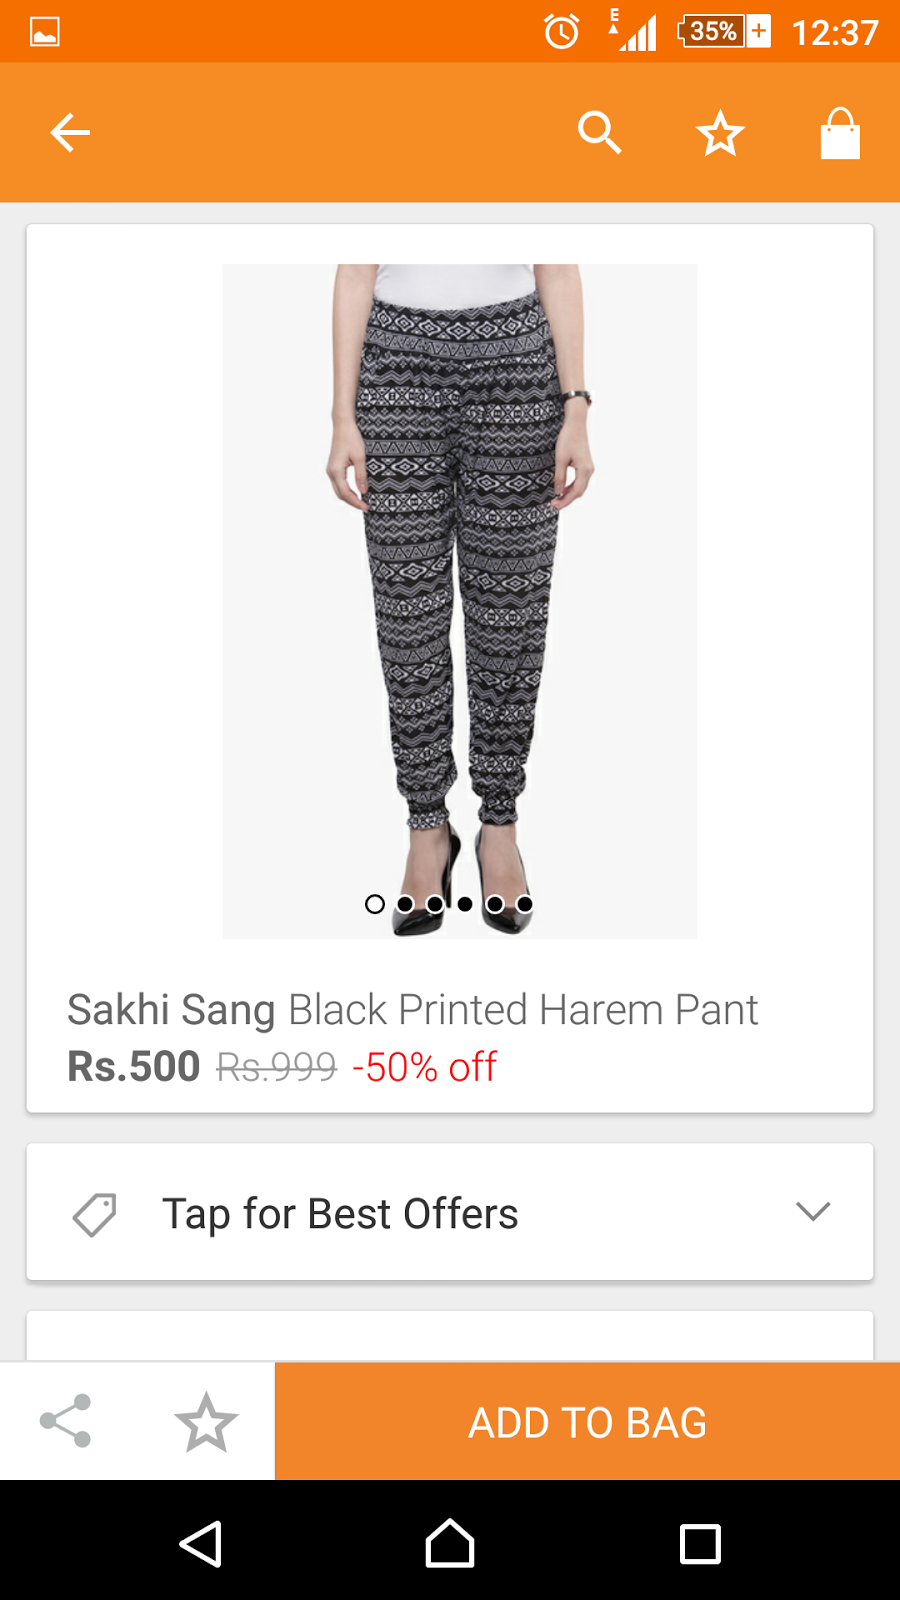 Jabong App Review: My Shopping Experience! - Expressing Life